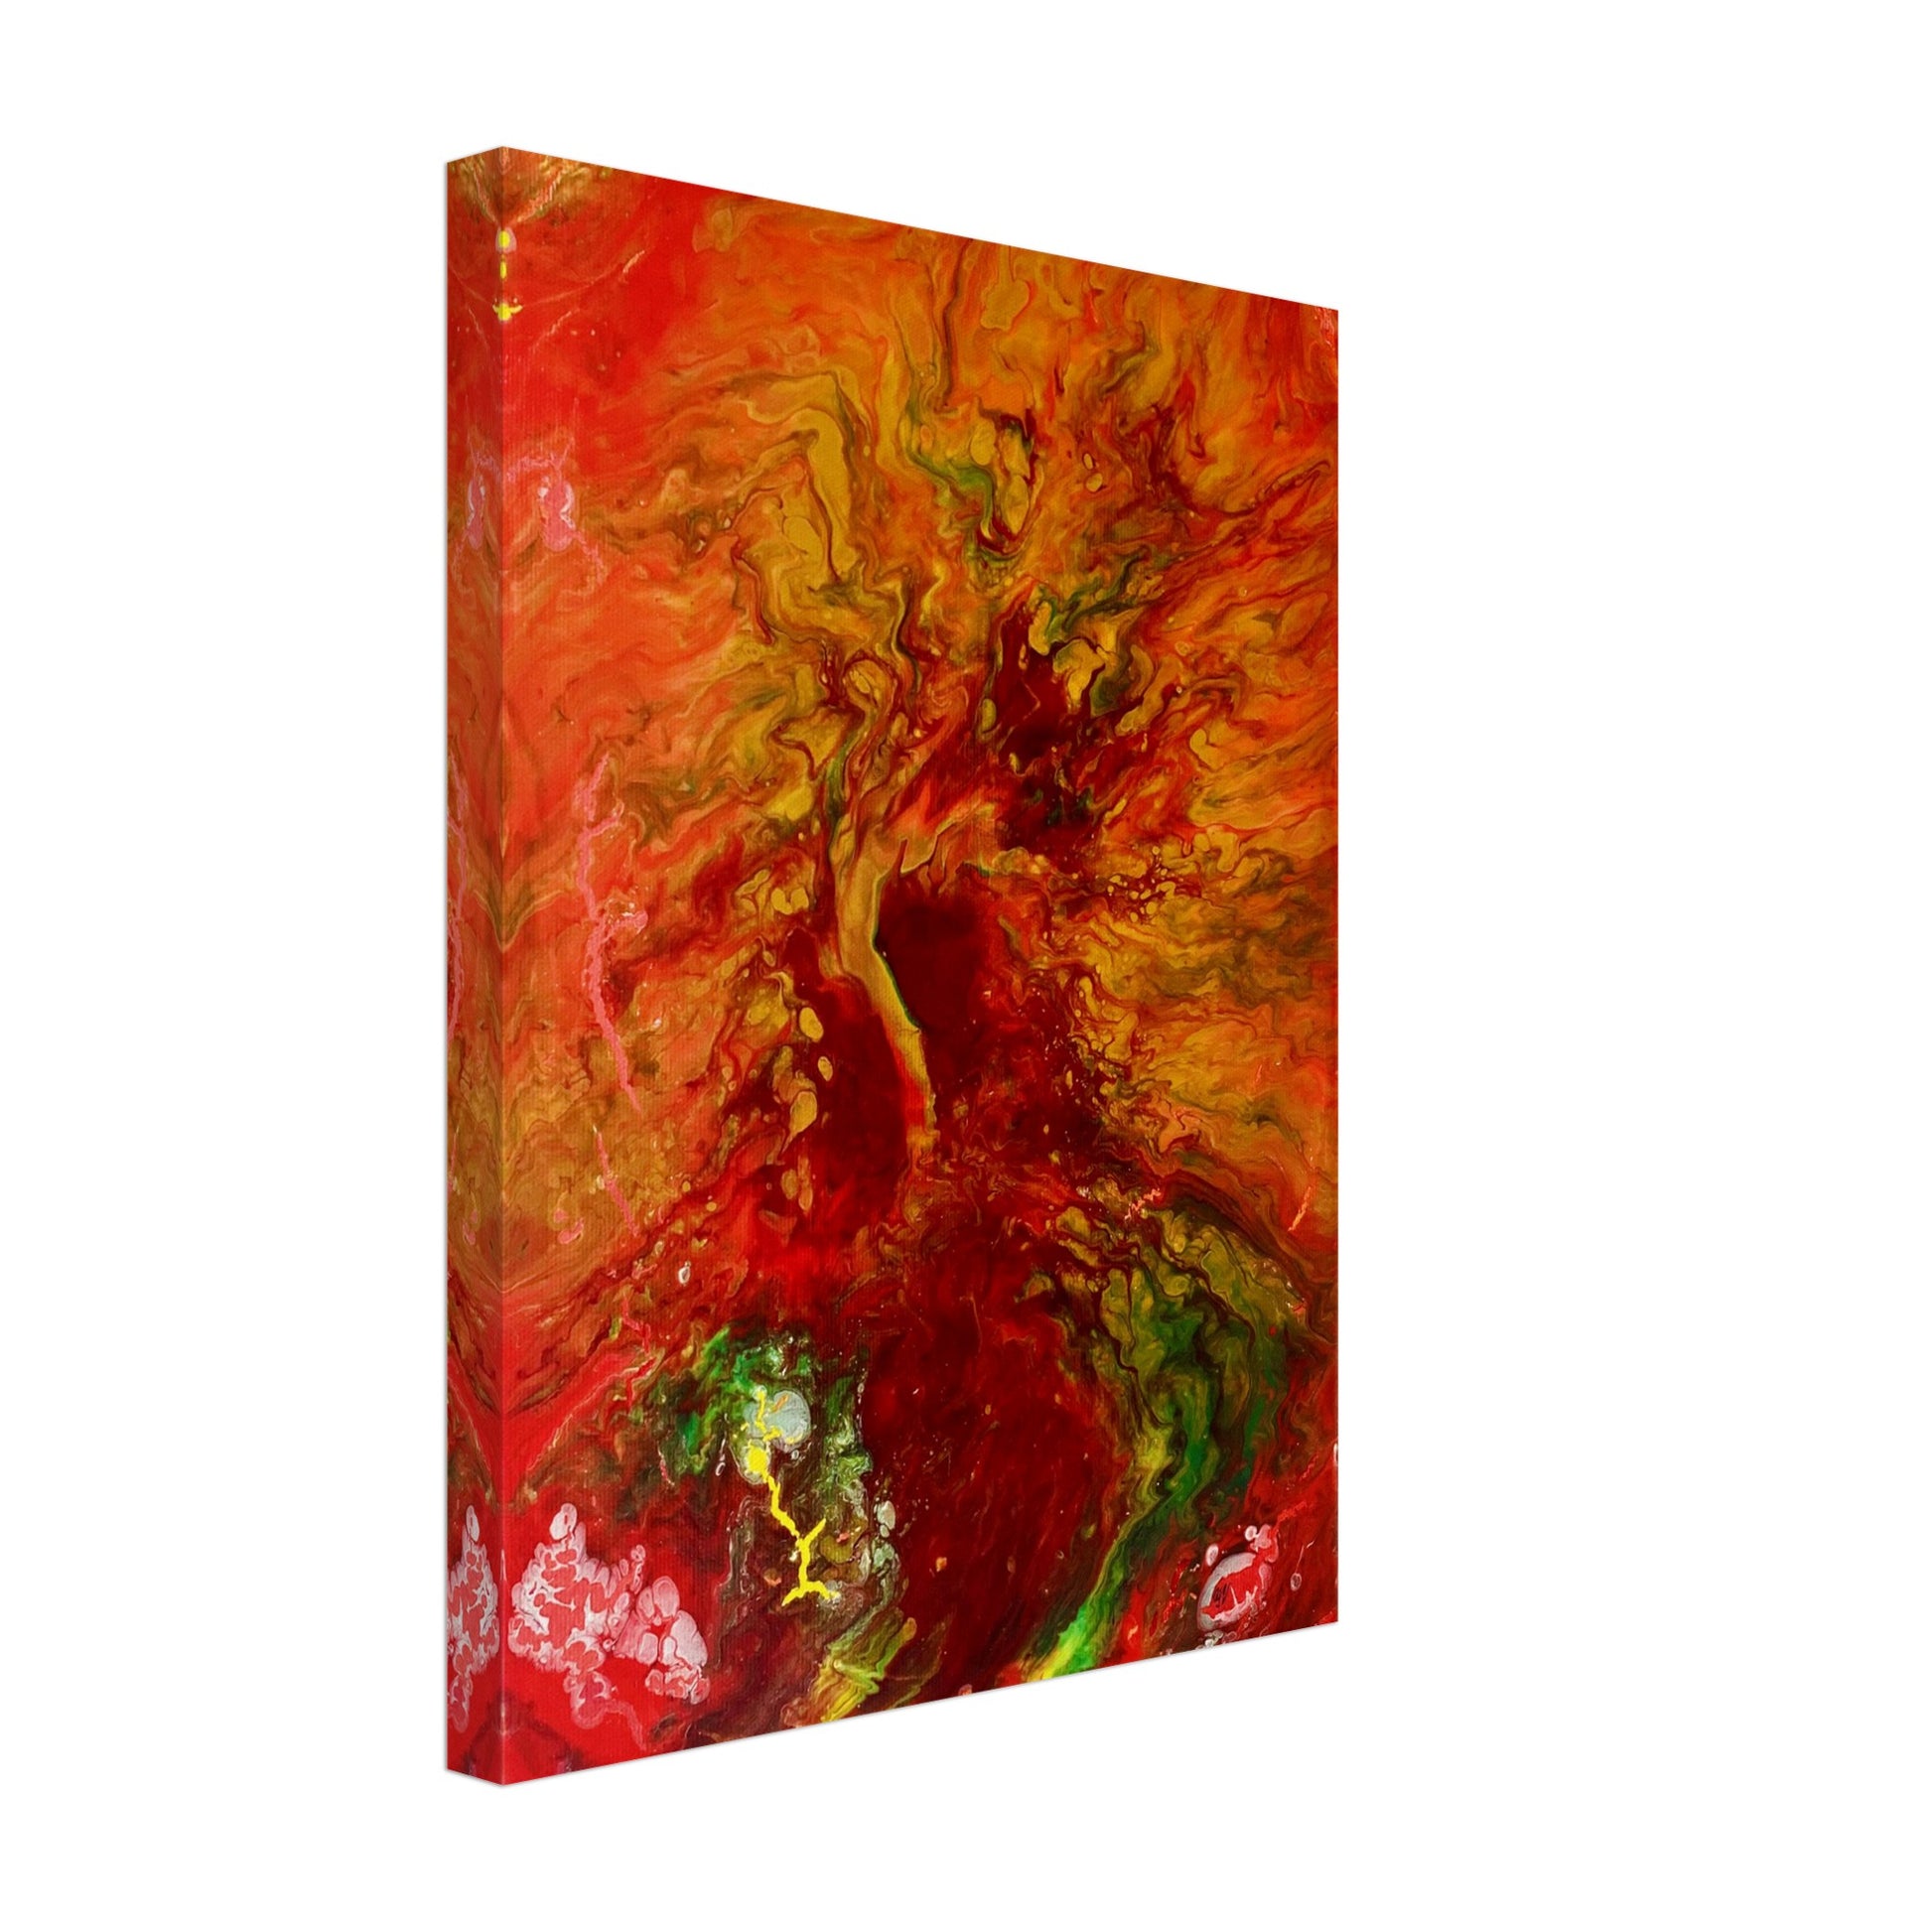 Close-up of 'The Tree of Life' canvas print, a fiery blend of red and green hues, symbolizing vitality, available in Yana Virtuoso's art shop.